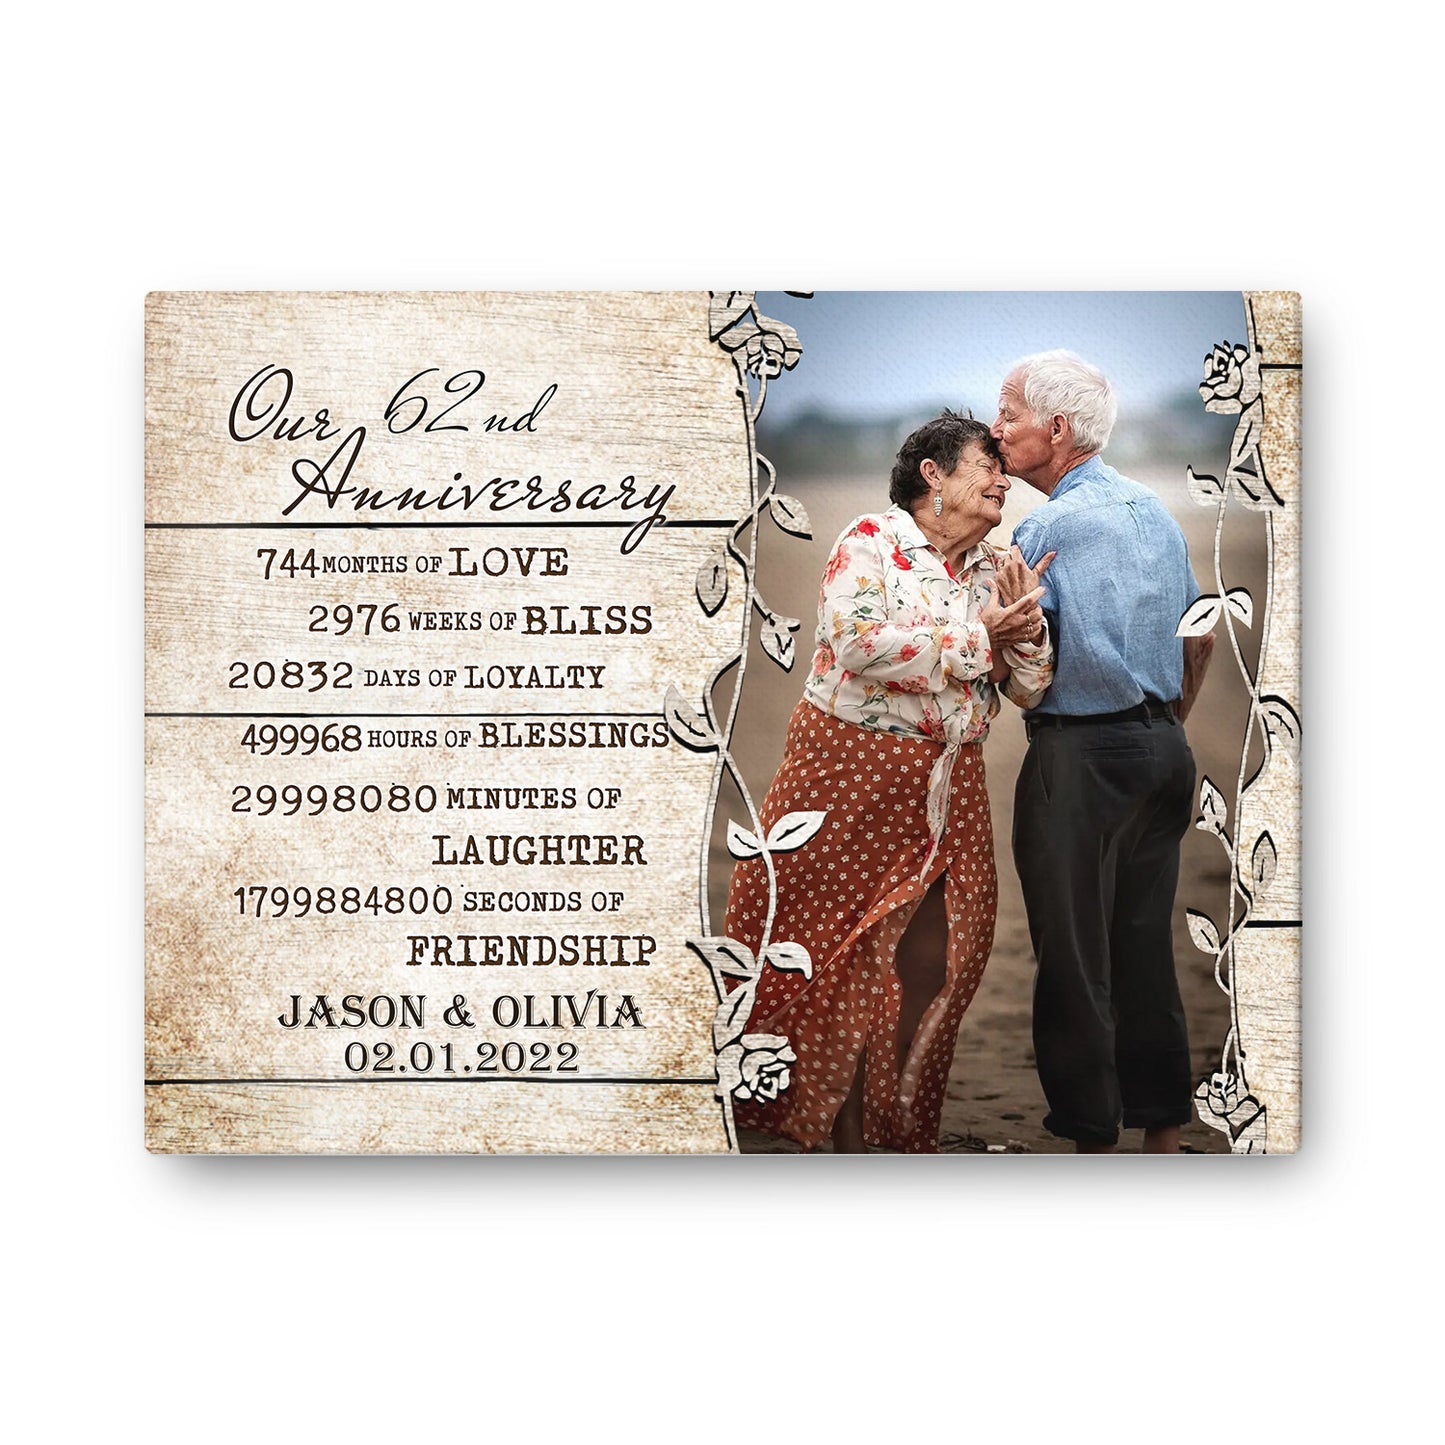 Our 62nd Anniversary Timeless love Valentine Gift Personalized Canvas